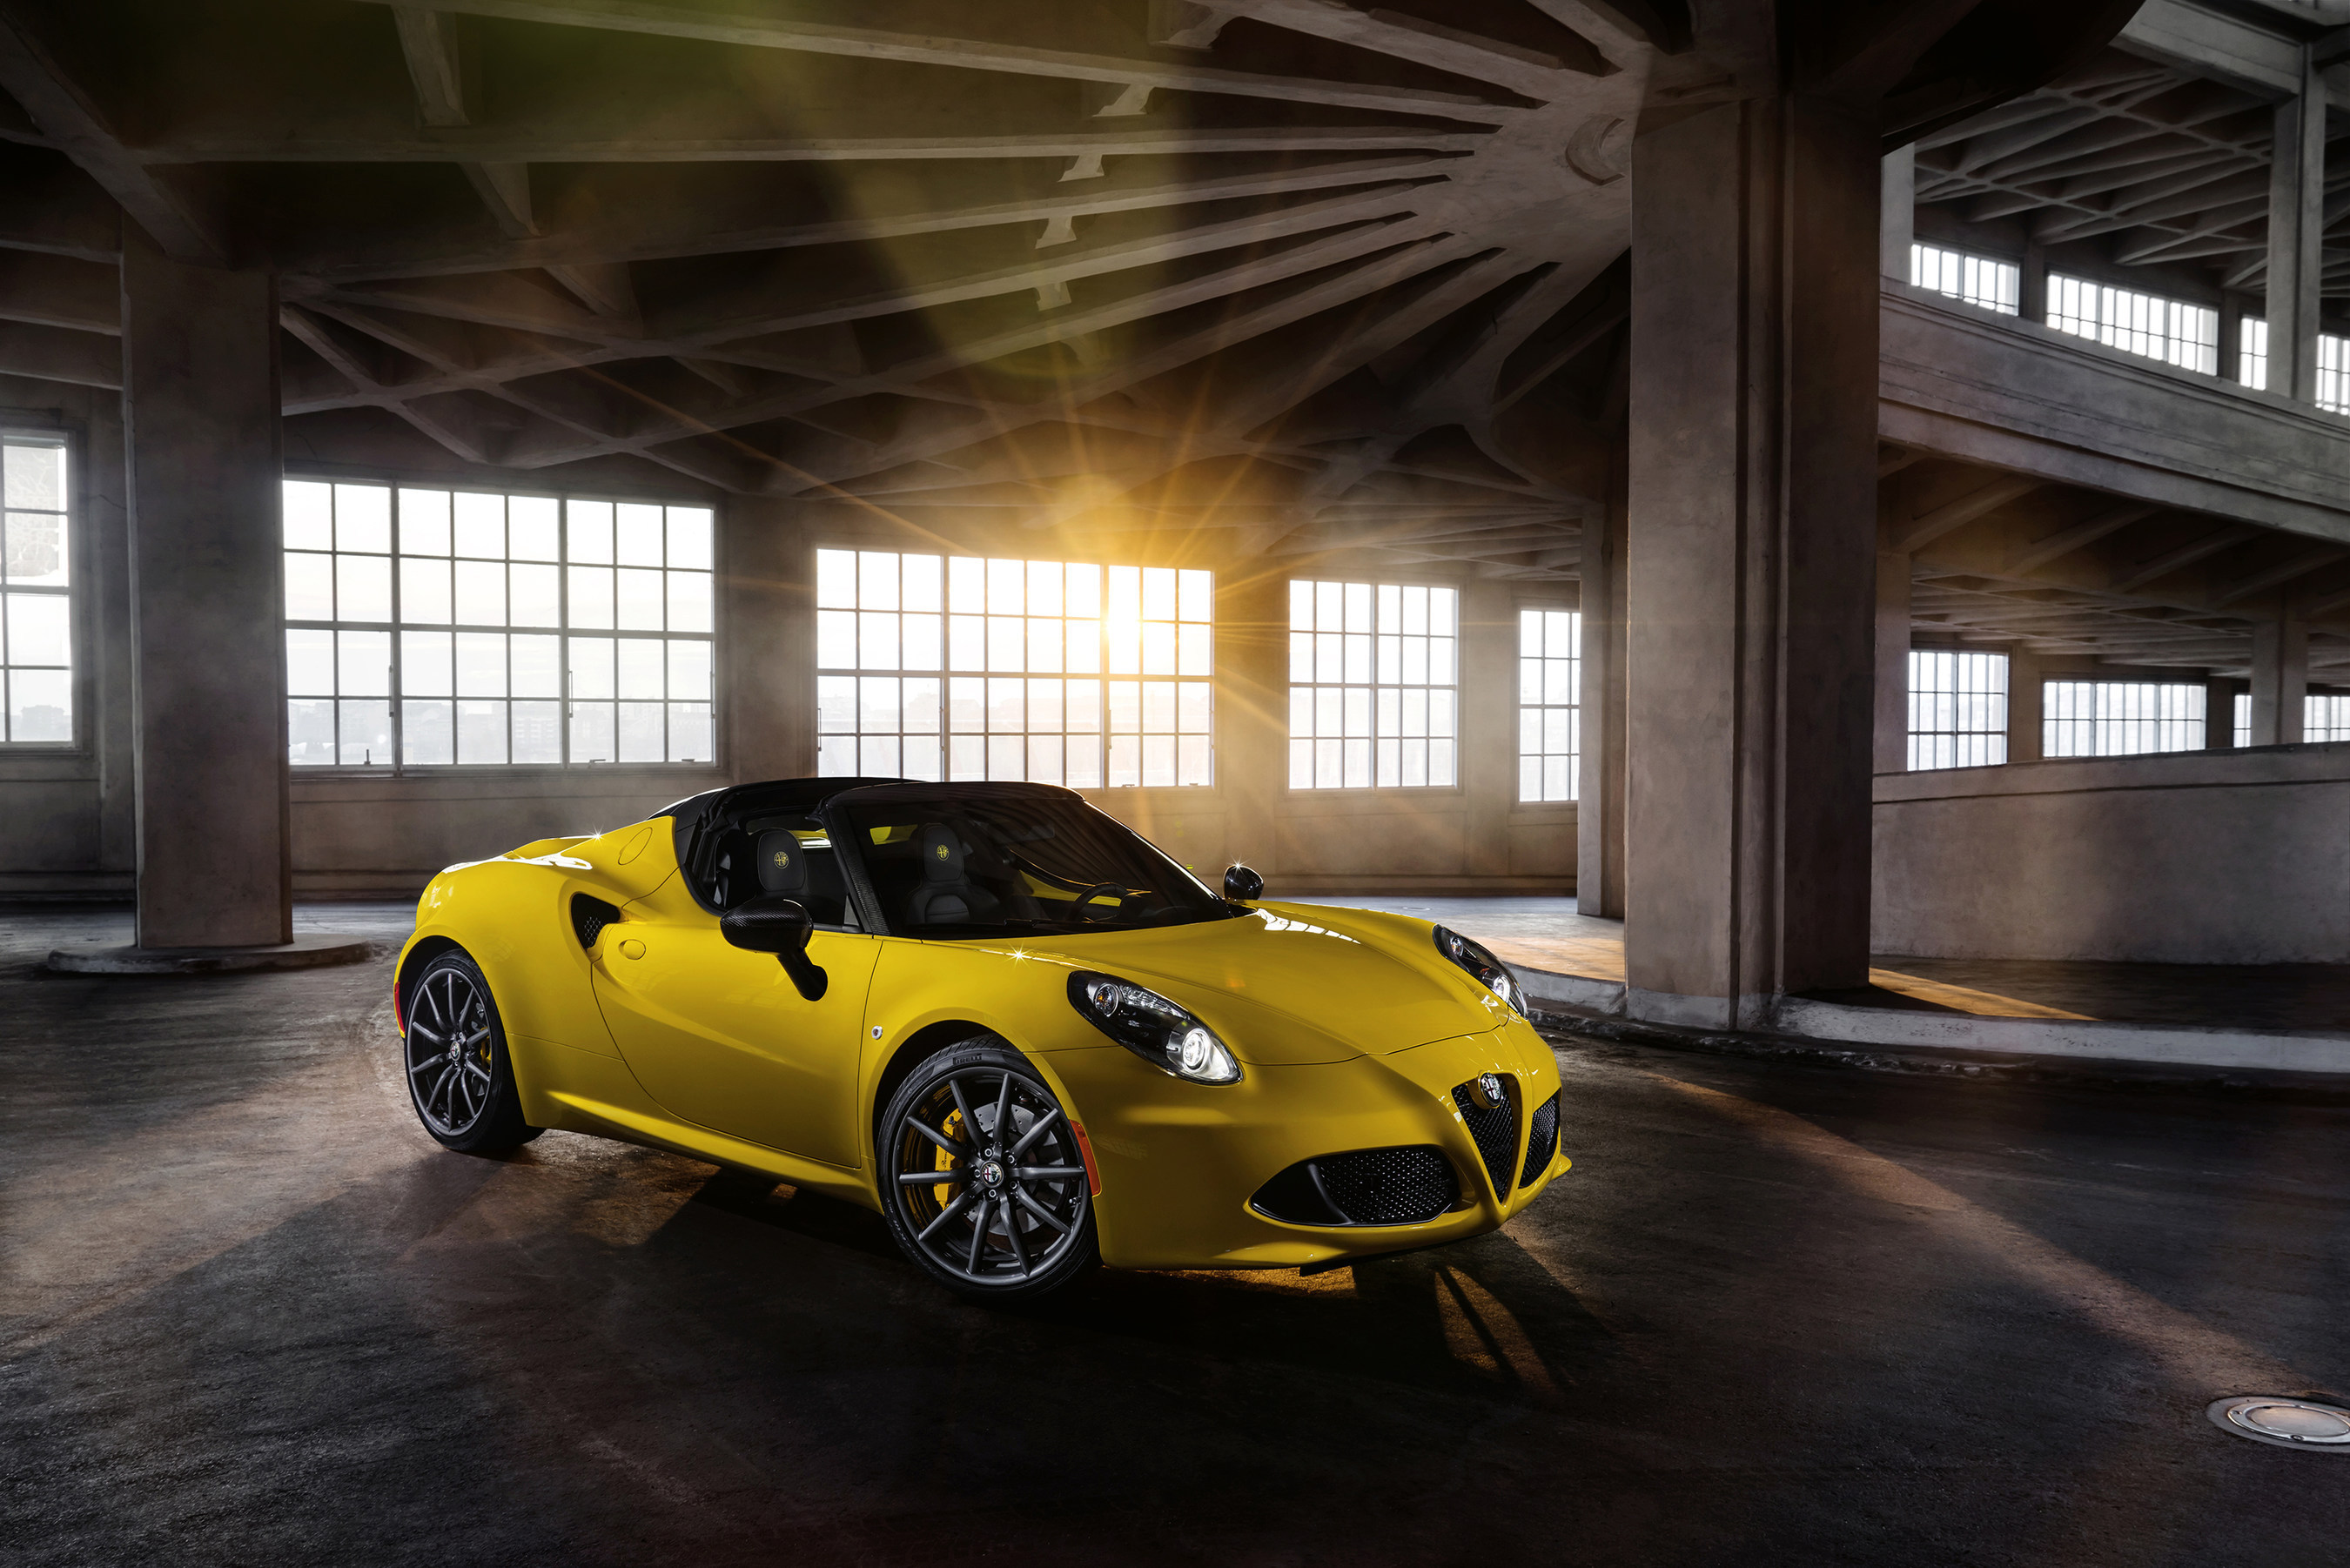 All-new 2015 Alfa Romeo 4C Spider: performance, technology, Italian style and open-air driving experience